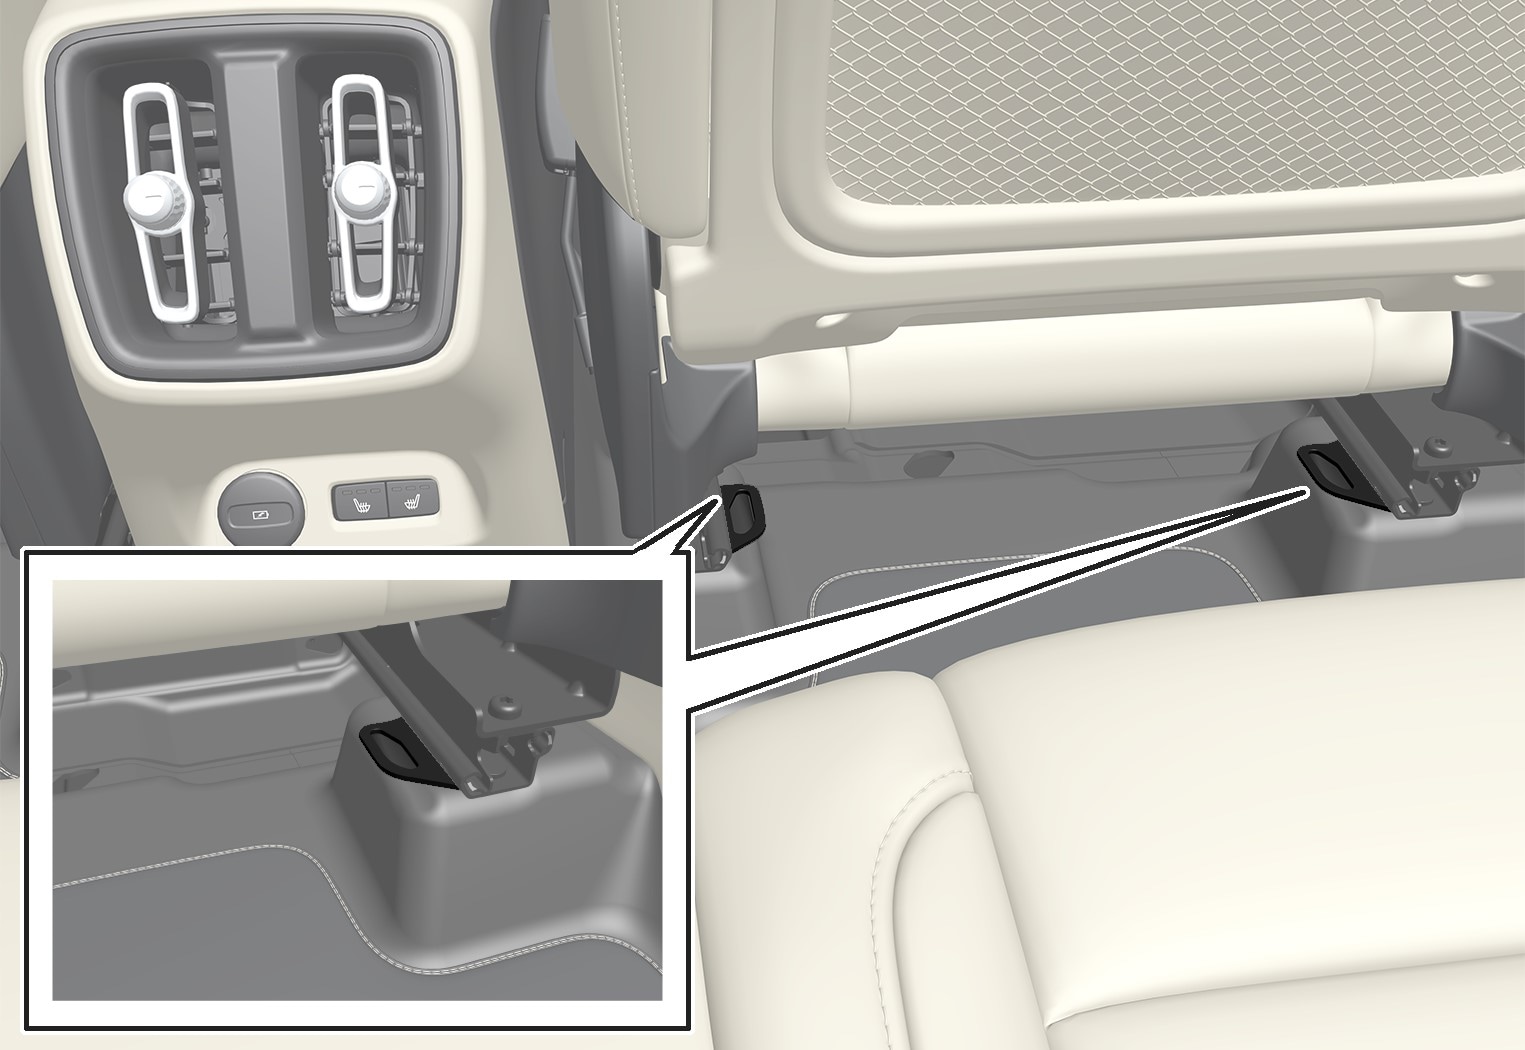 P6-1746-XC40–Safety–Lower tether position rear